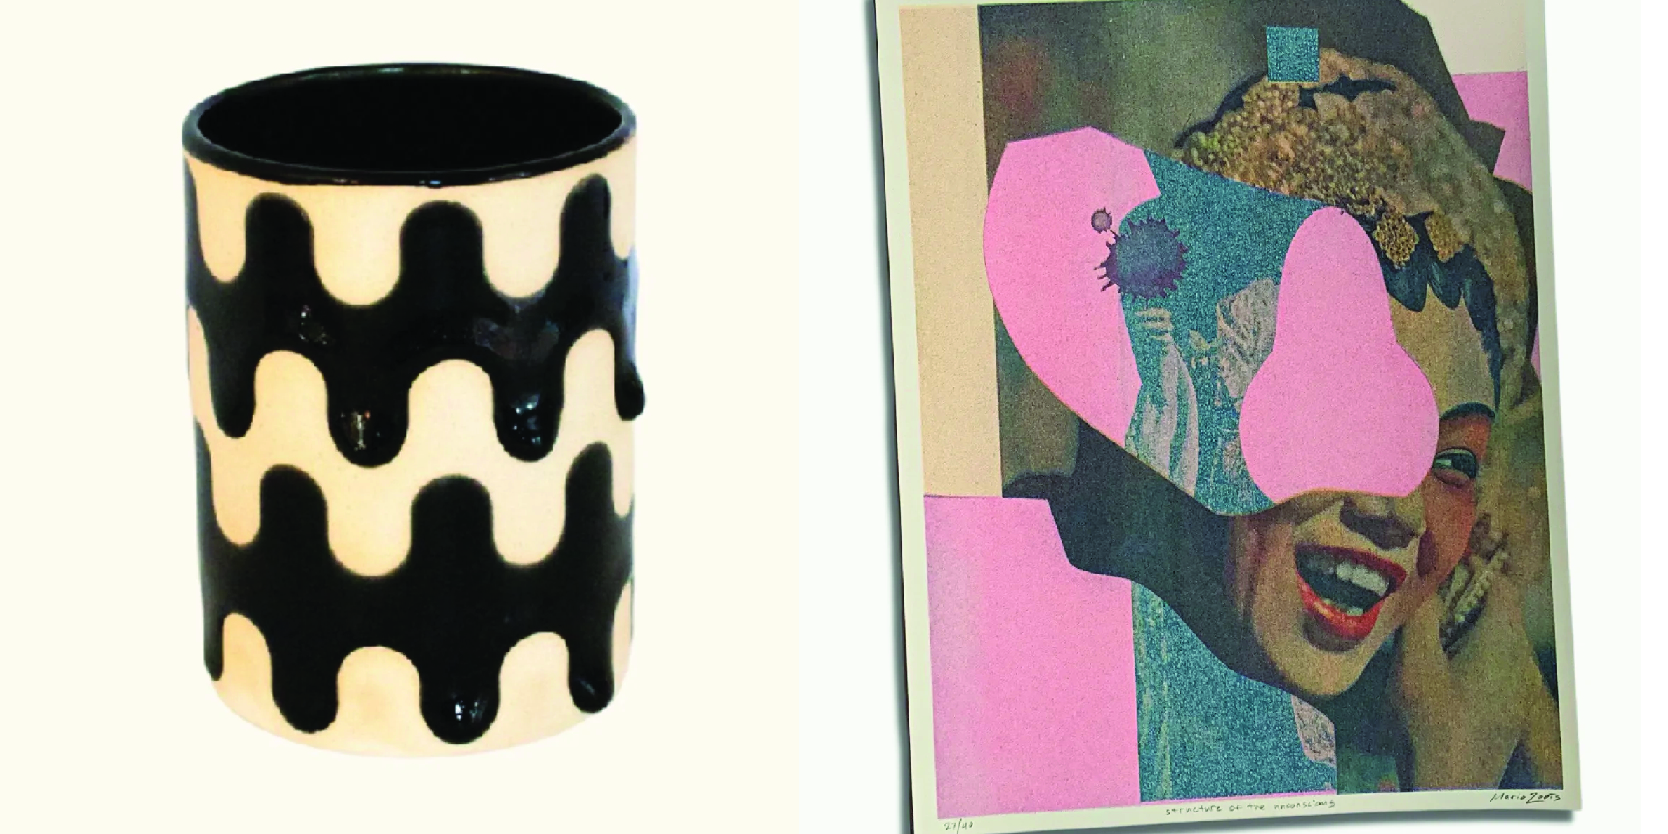 Two photos: one of a black and beige cup and one of a collage art print.